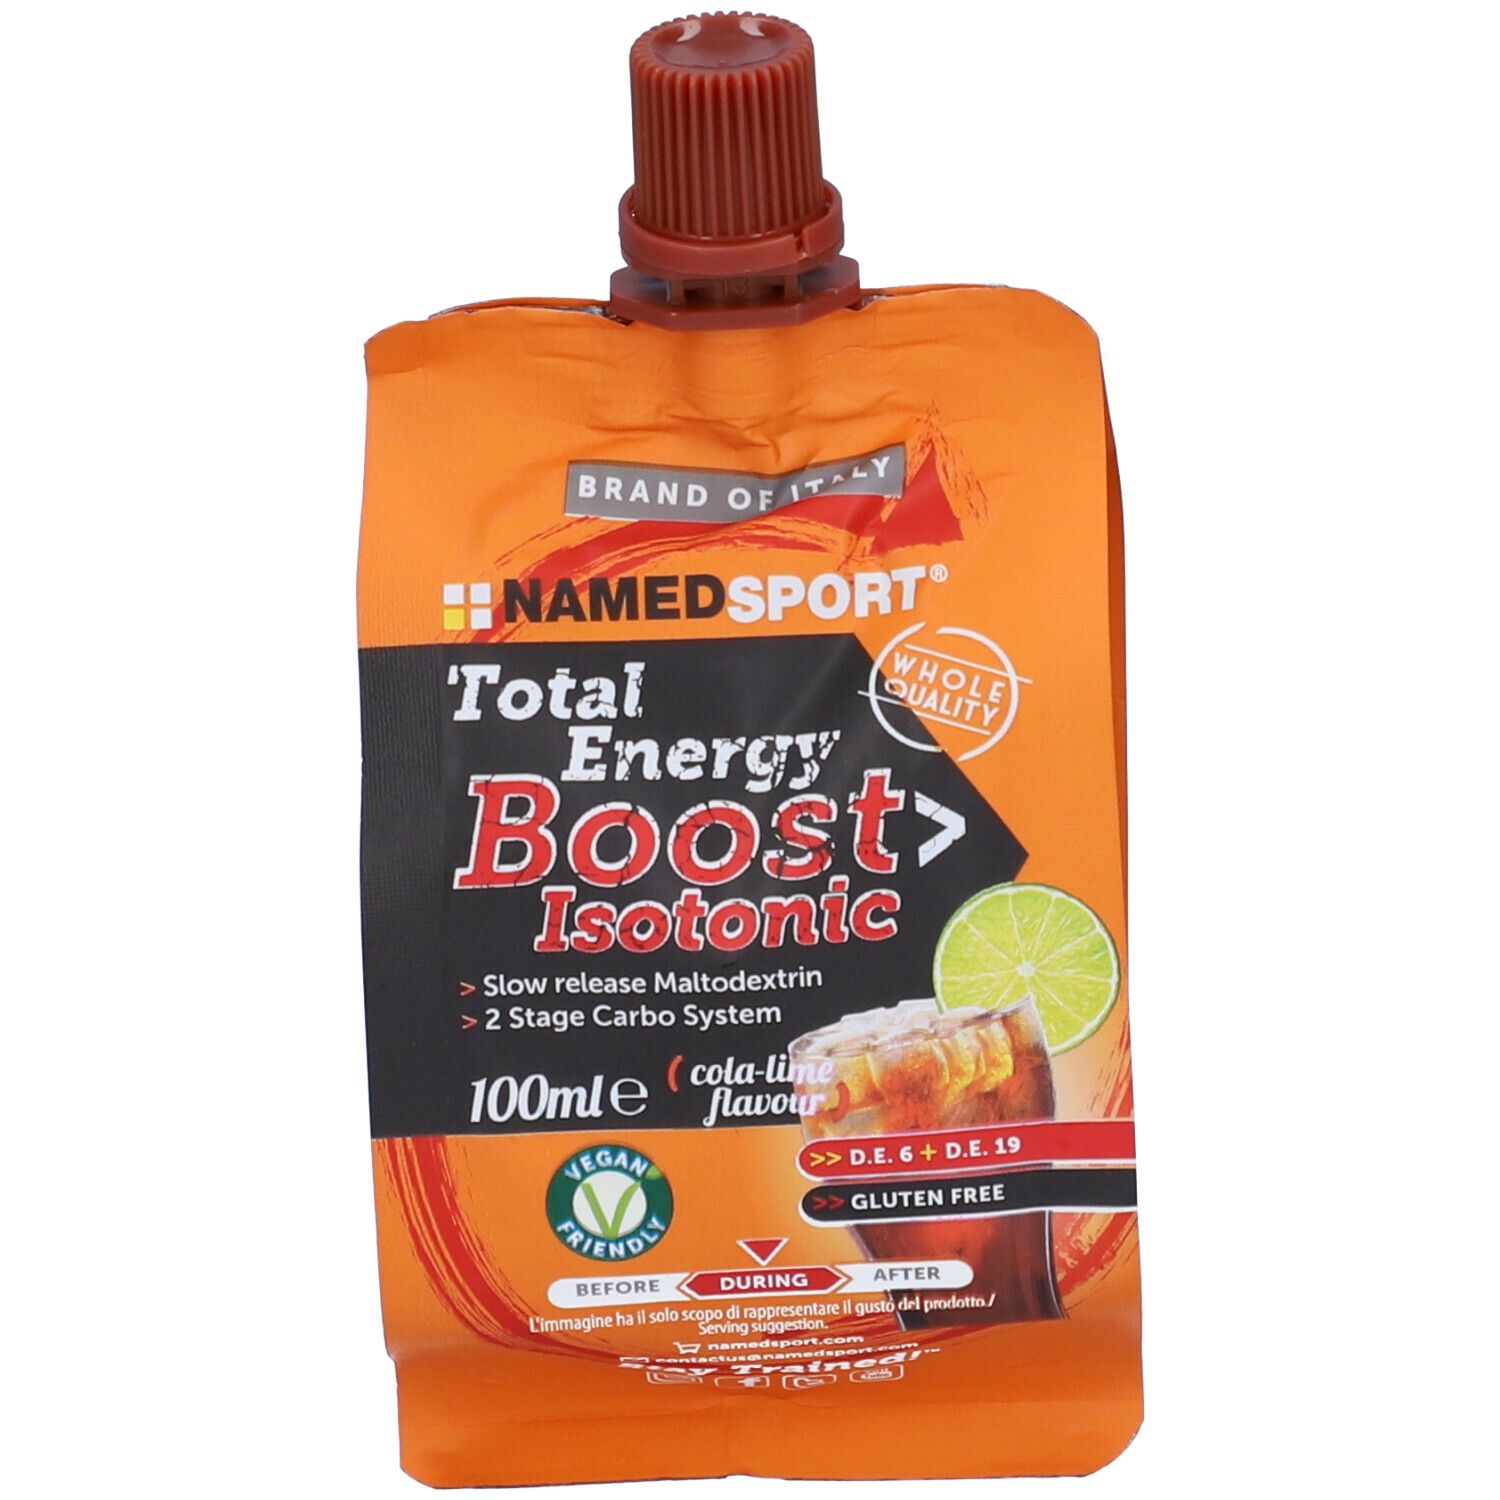 Image of NAMED SPORT® Total Energy Boost ISOTONIC COLA-LIME